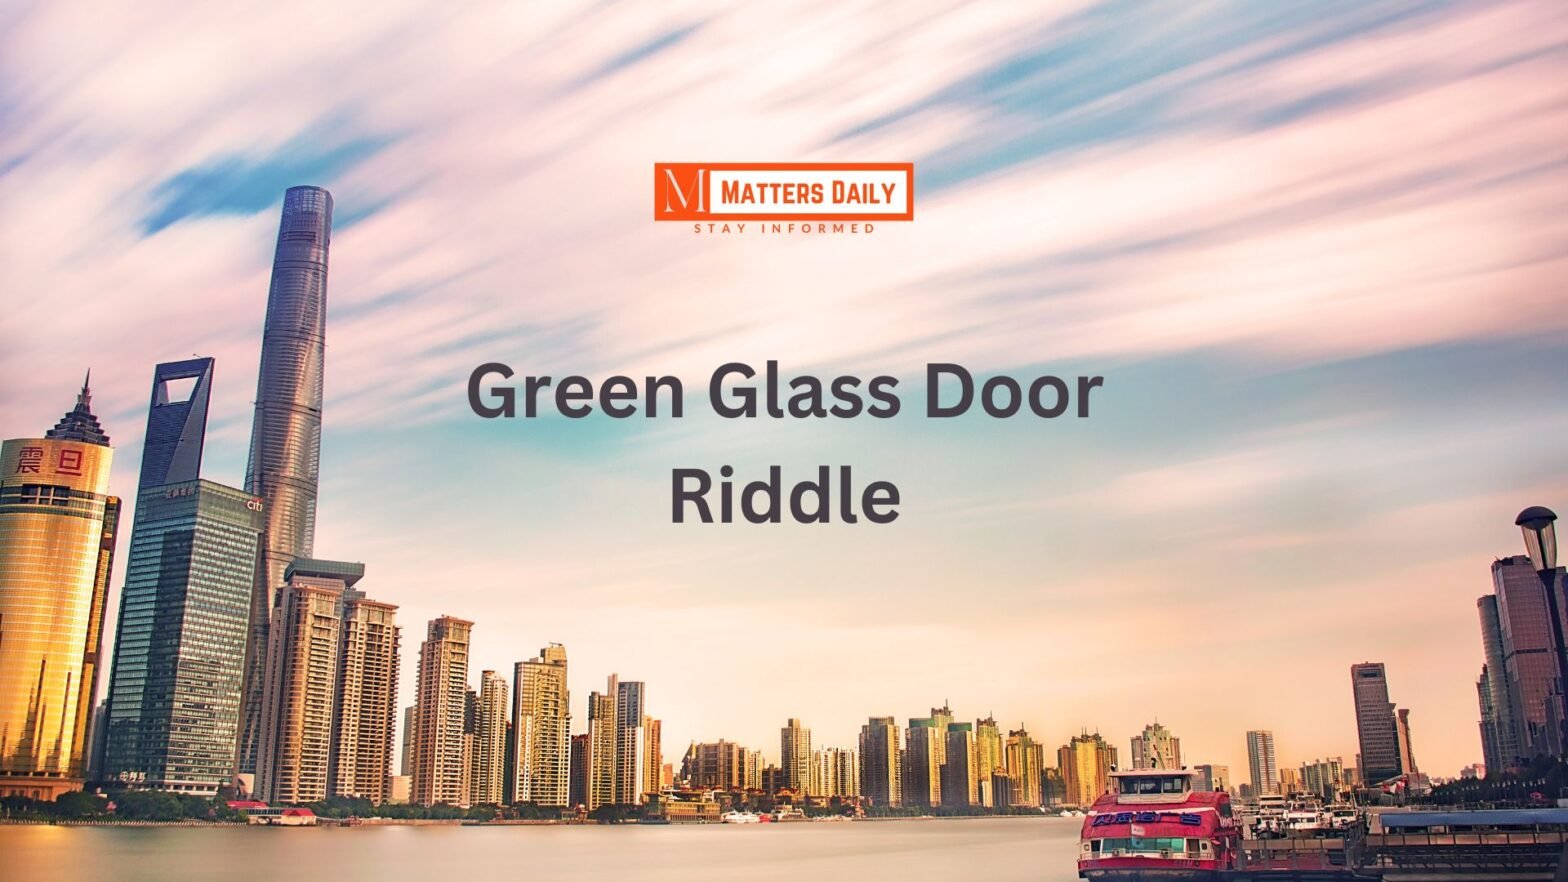 Demystifying the Green Glass Door Riddle